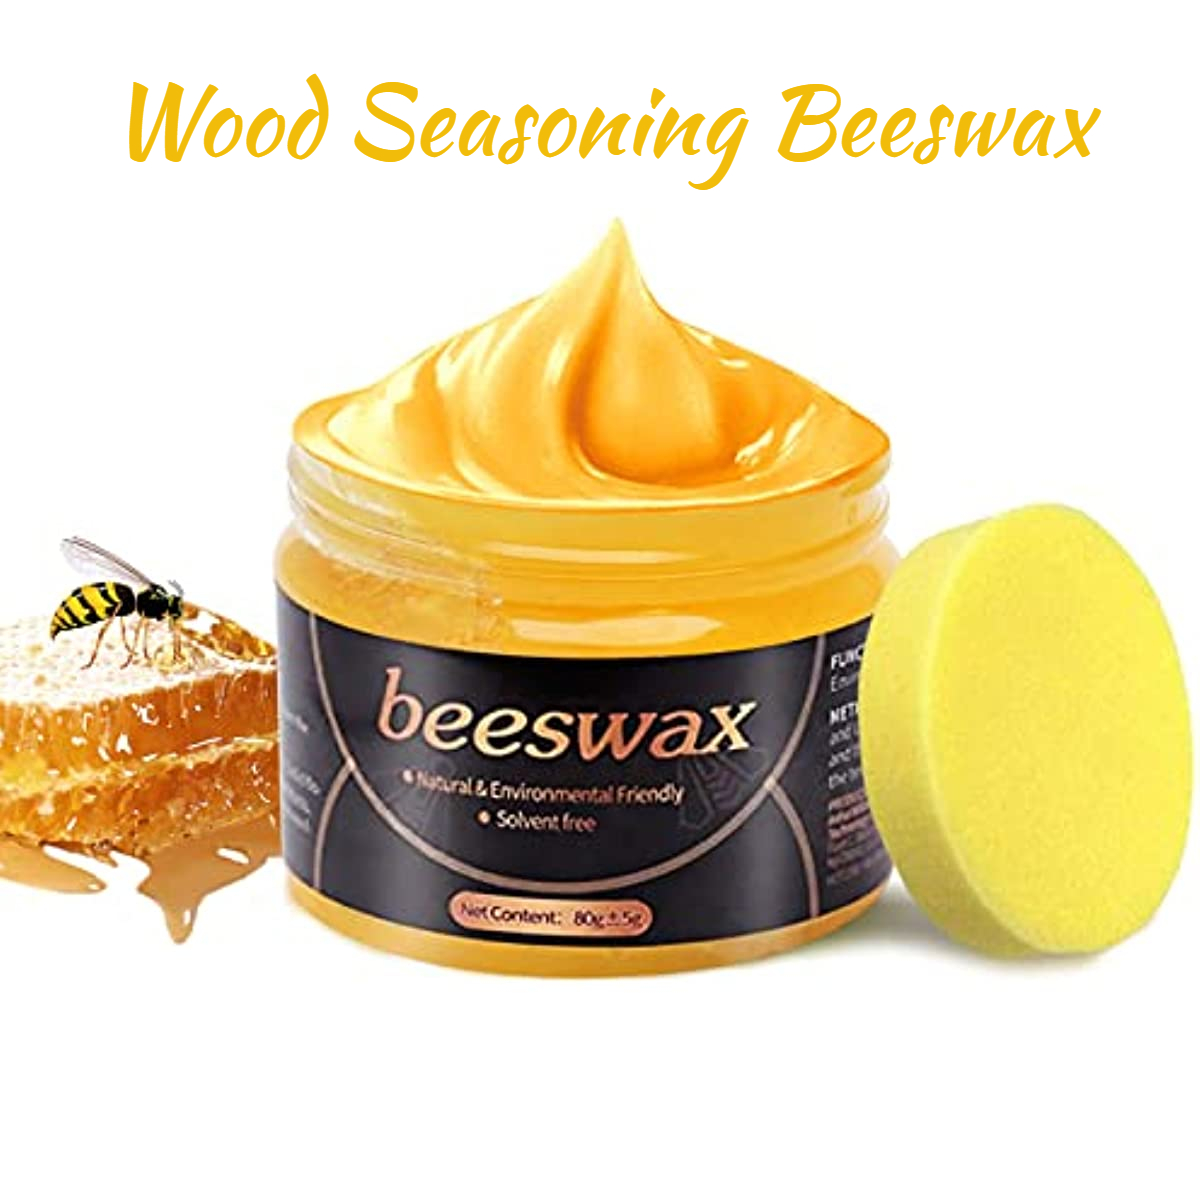 2 8oz Natural Beeswax Furniture Polish for Doors and Floors